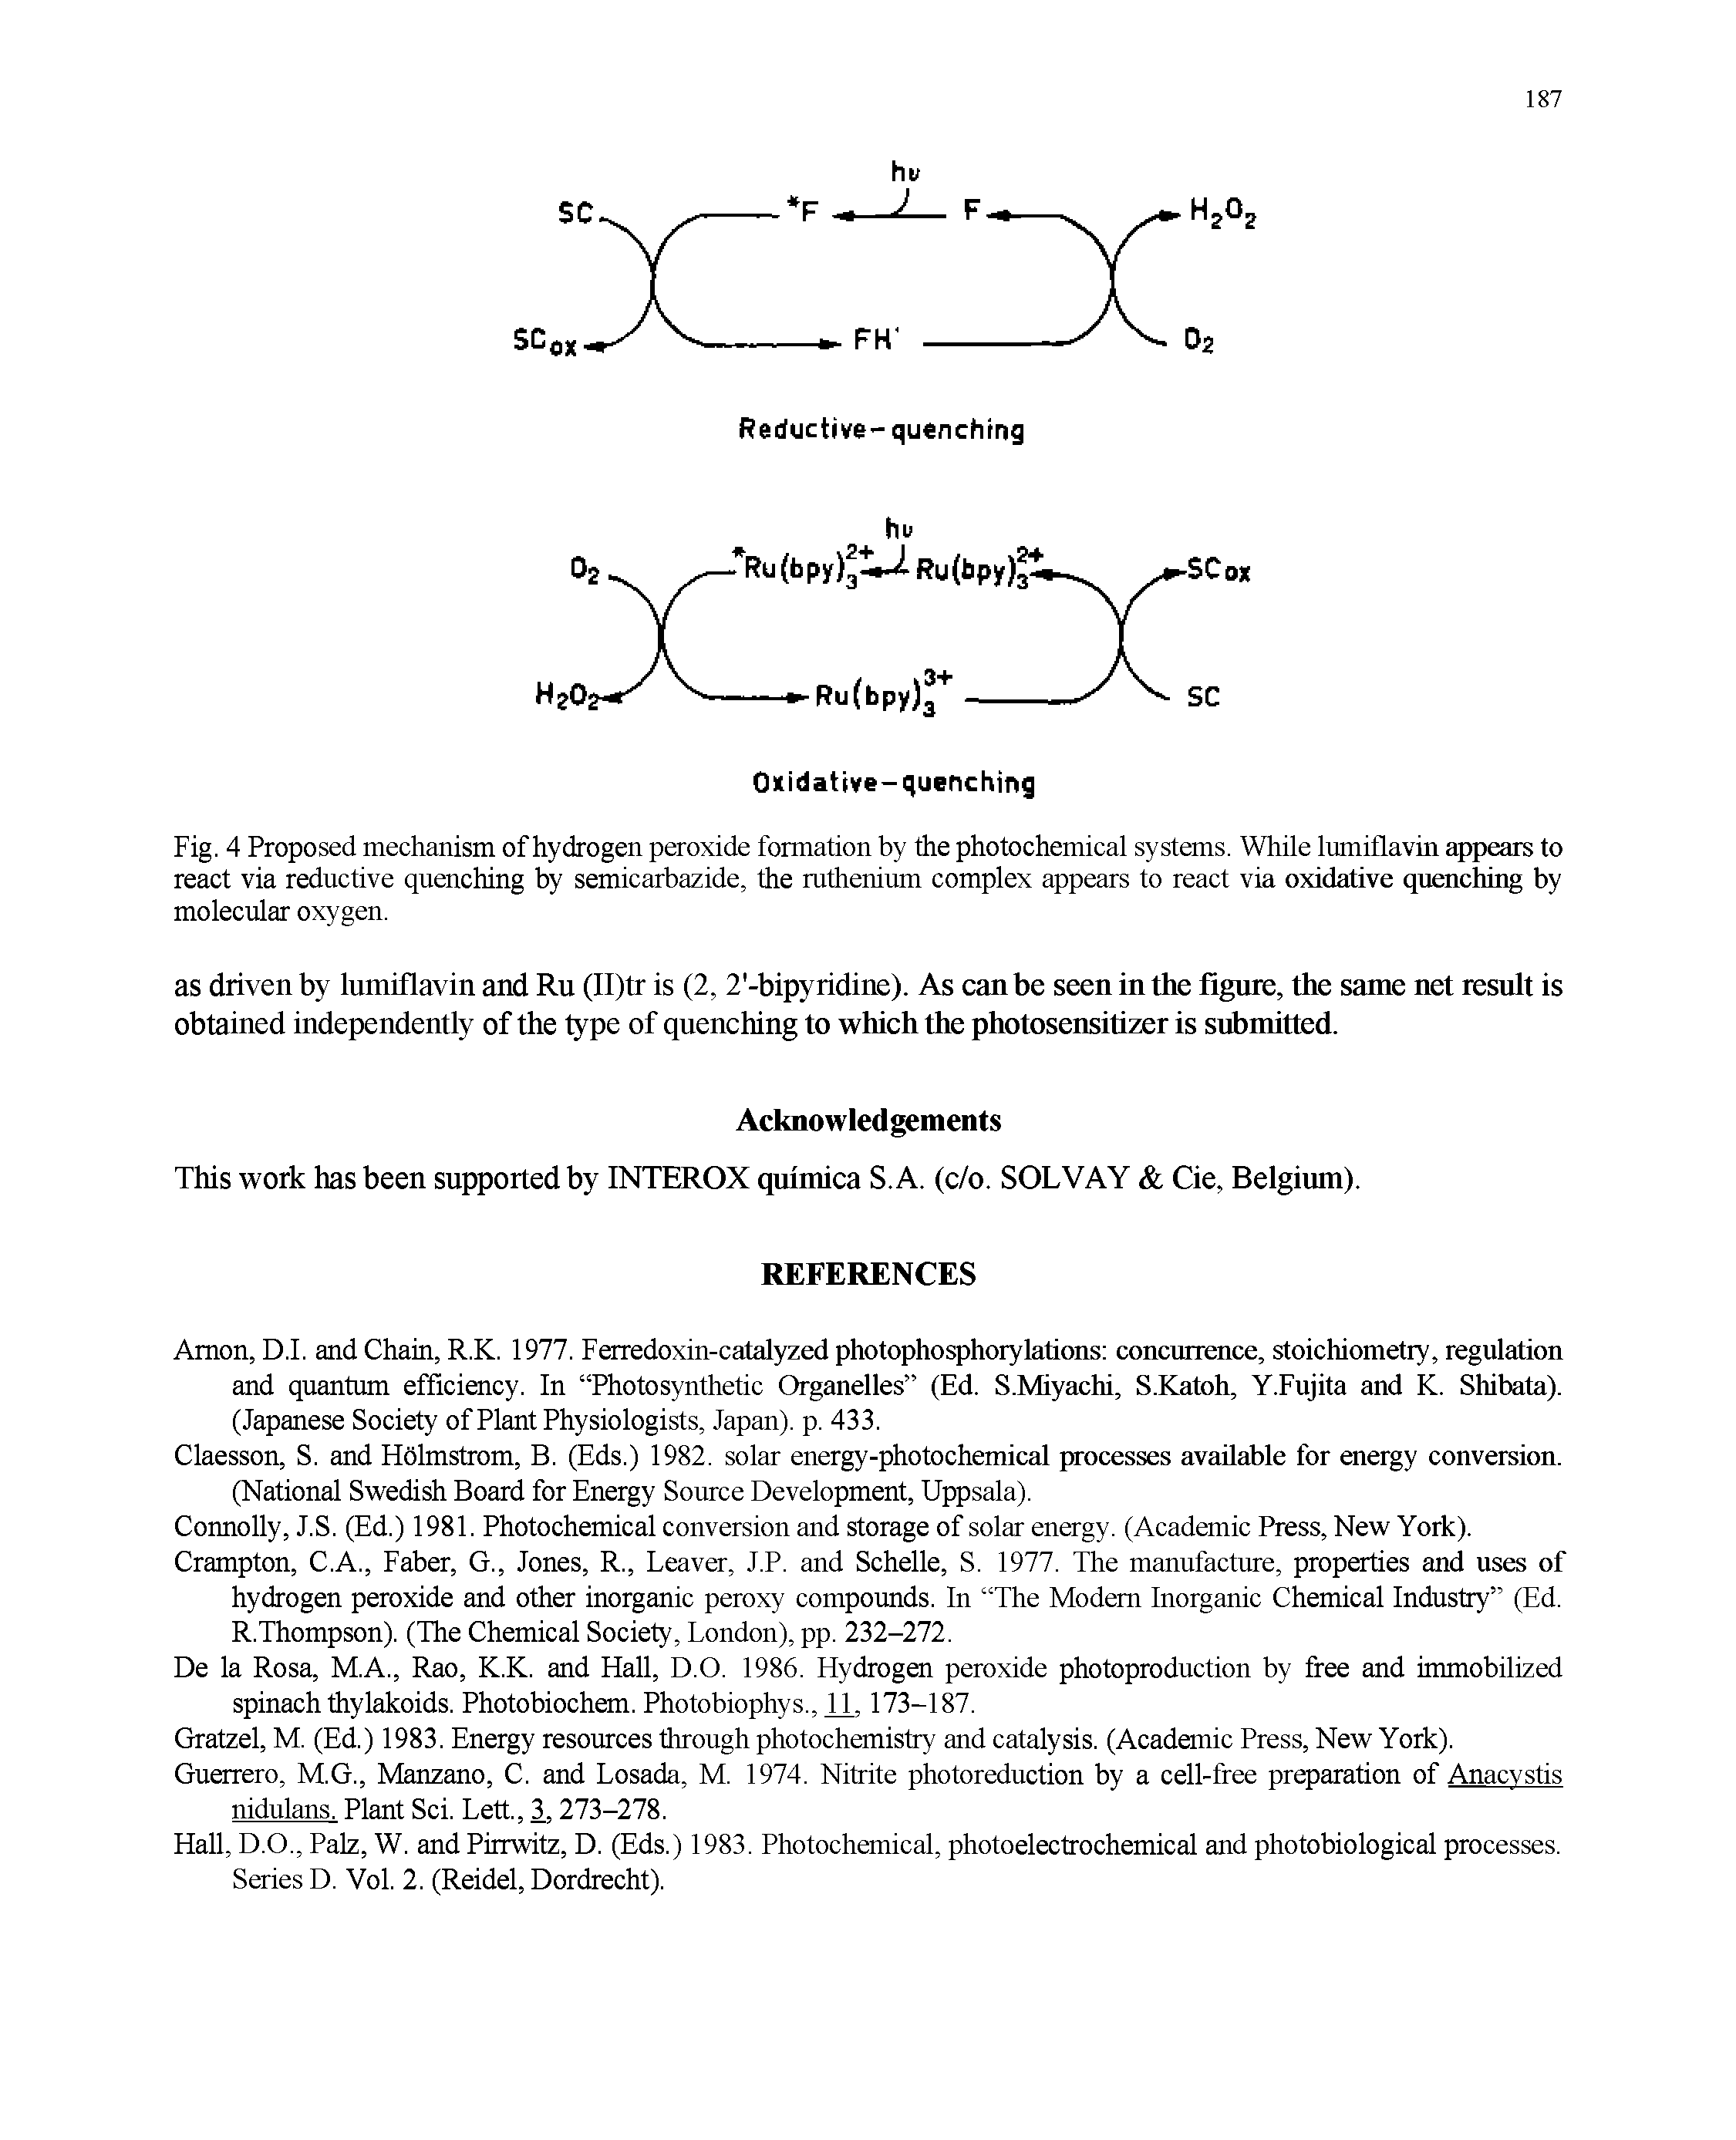 Fig. 4 Proposed mechanism of hydrogen peroxide formation by the photochemical systems. While lumiflavin appears to react via reductive quenching by semicarbazide, the ruthenium complex appears to react via oxidative quenching by molecular oxygen.